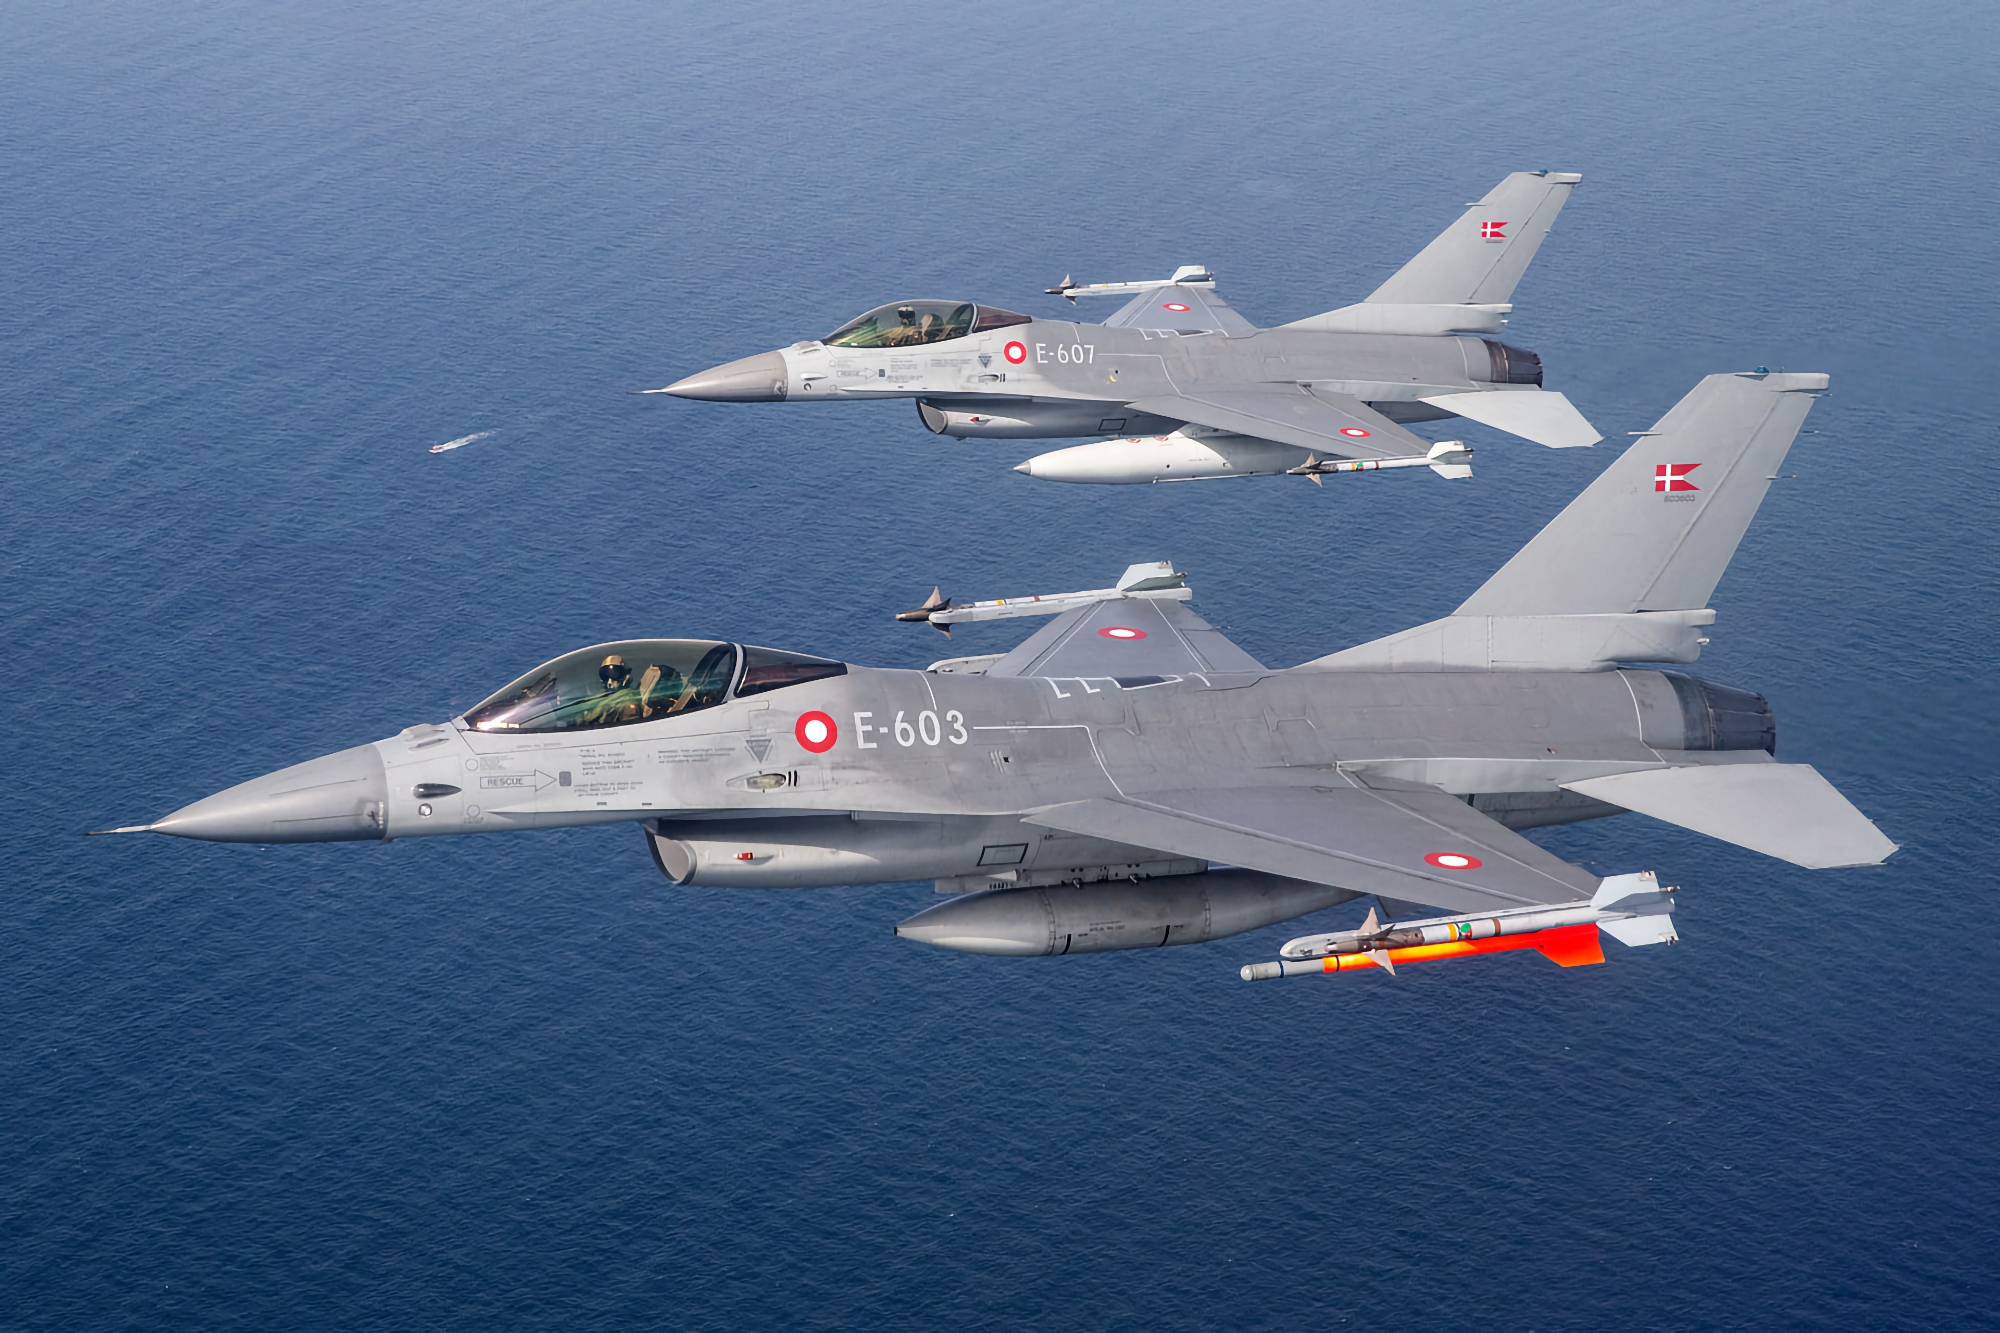 Denmark tells when it will transfer first F-16 Fighting Falcon fighters to Ukraine